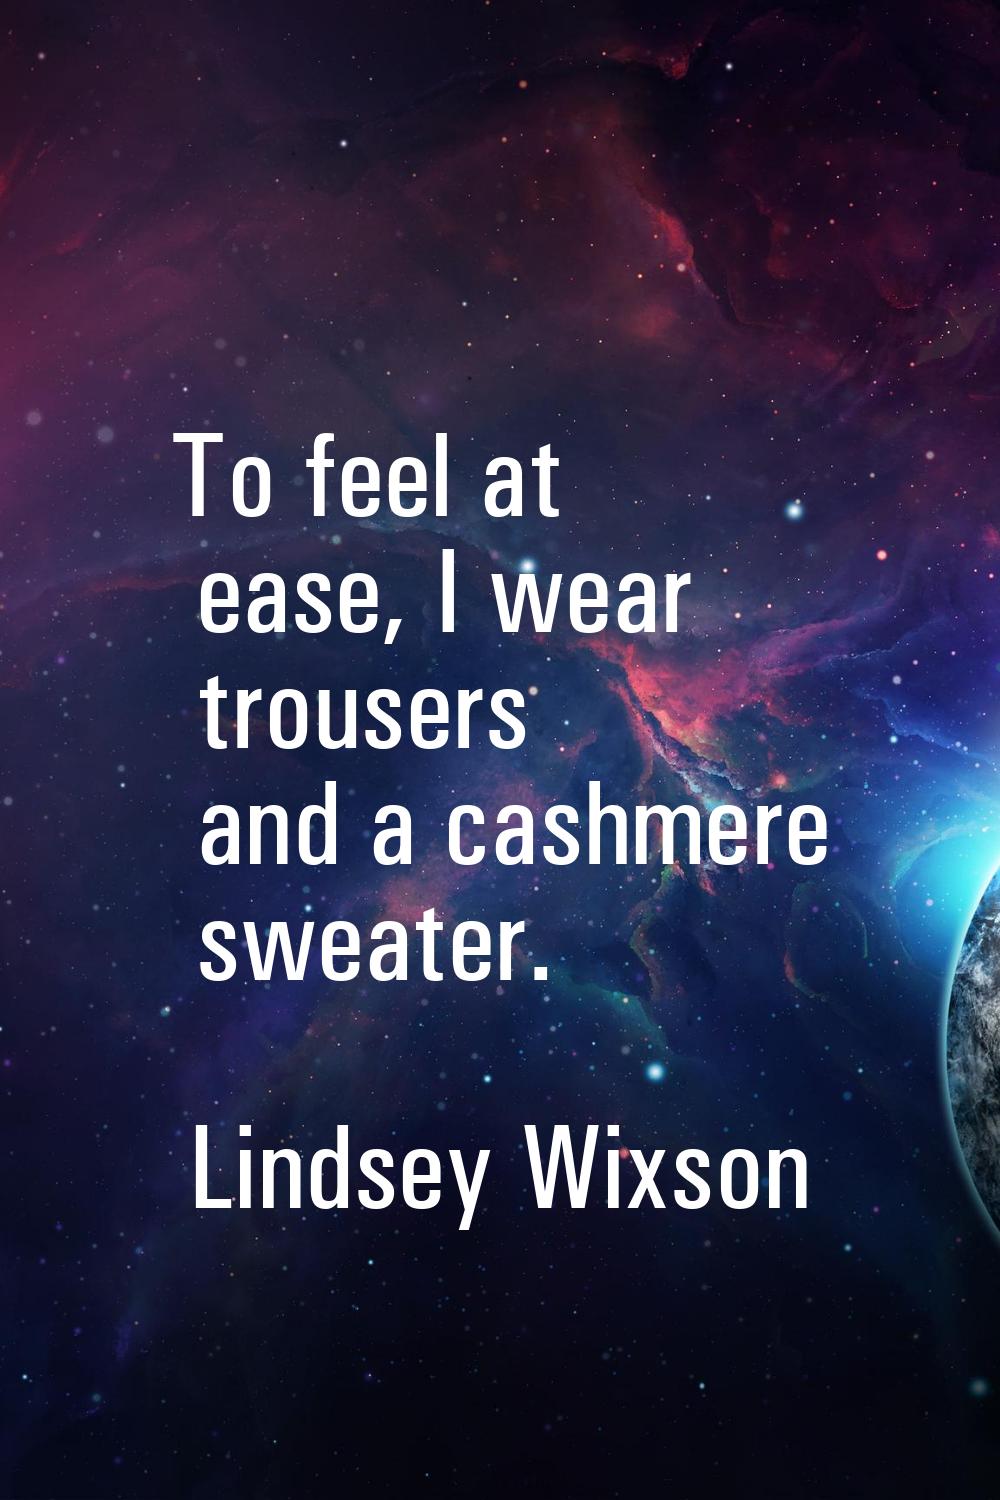 To feel at ease, I wear trousers and a cashmere sweater.